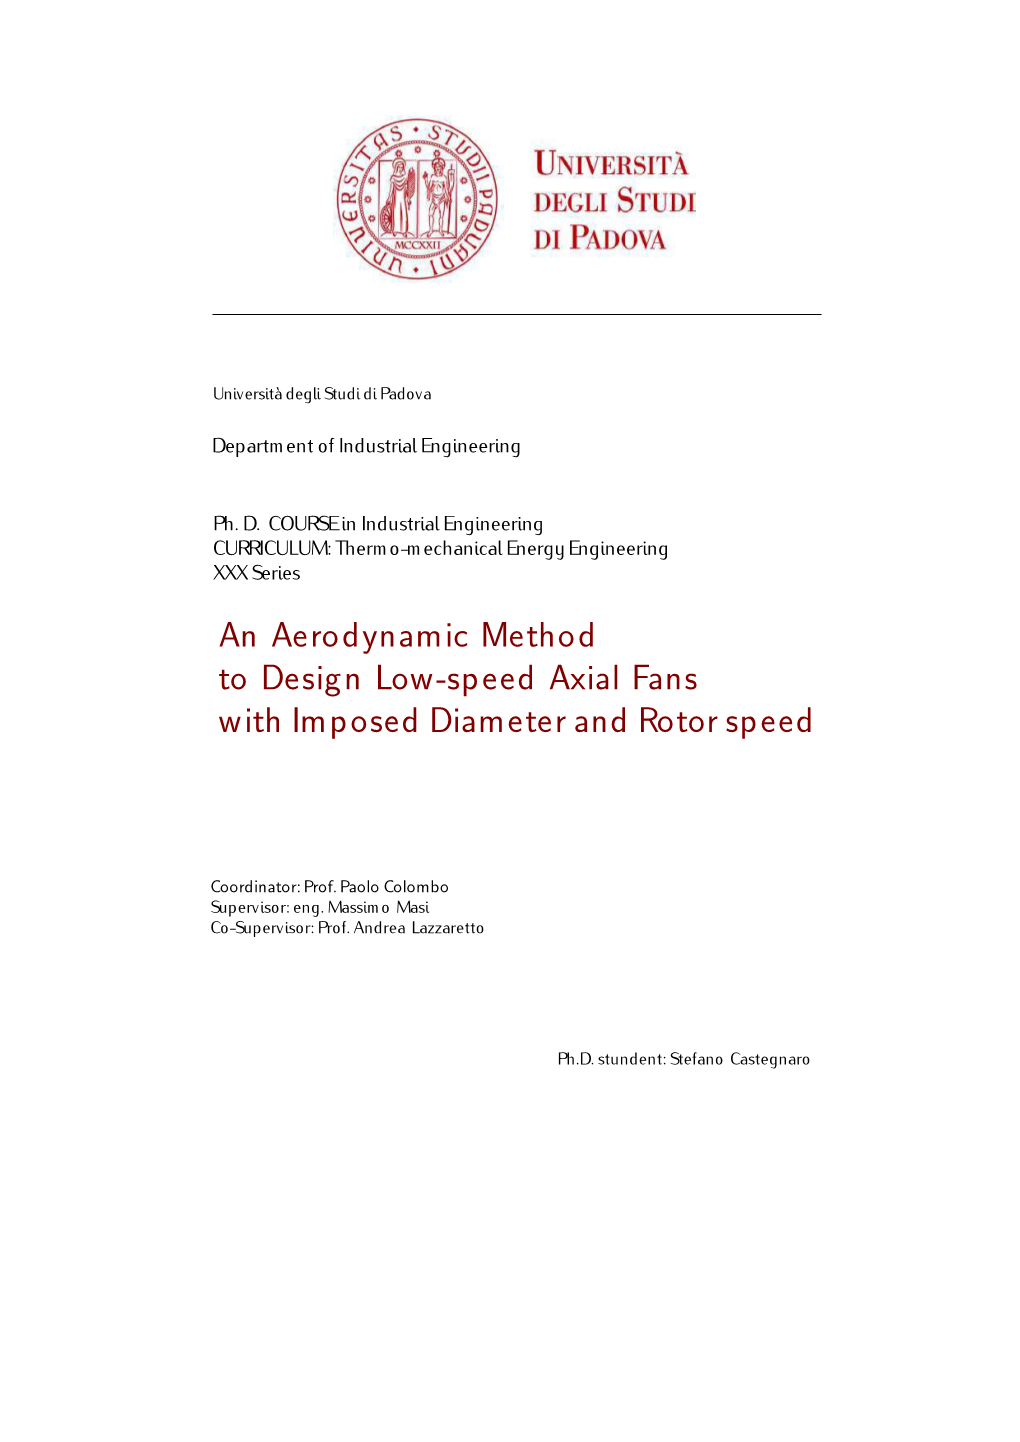 An Aerodynamic Method to Design Low-Speed Axial Fans with Imposed Diameterand Rotorspeed